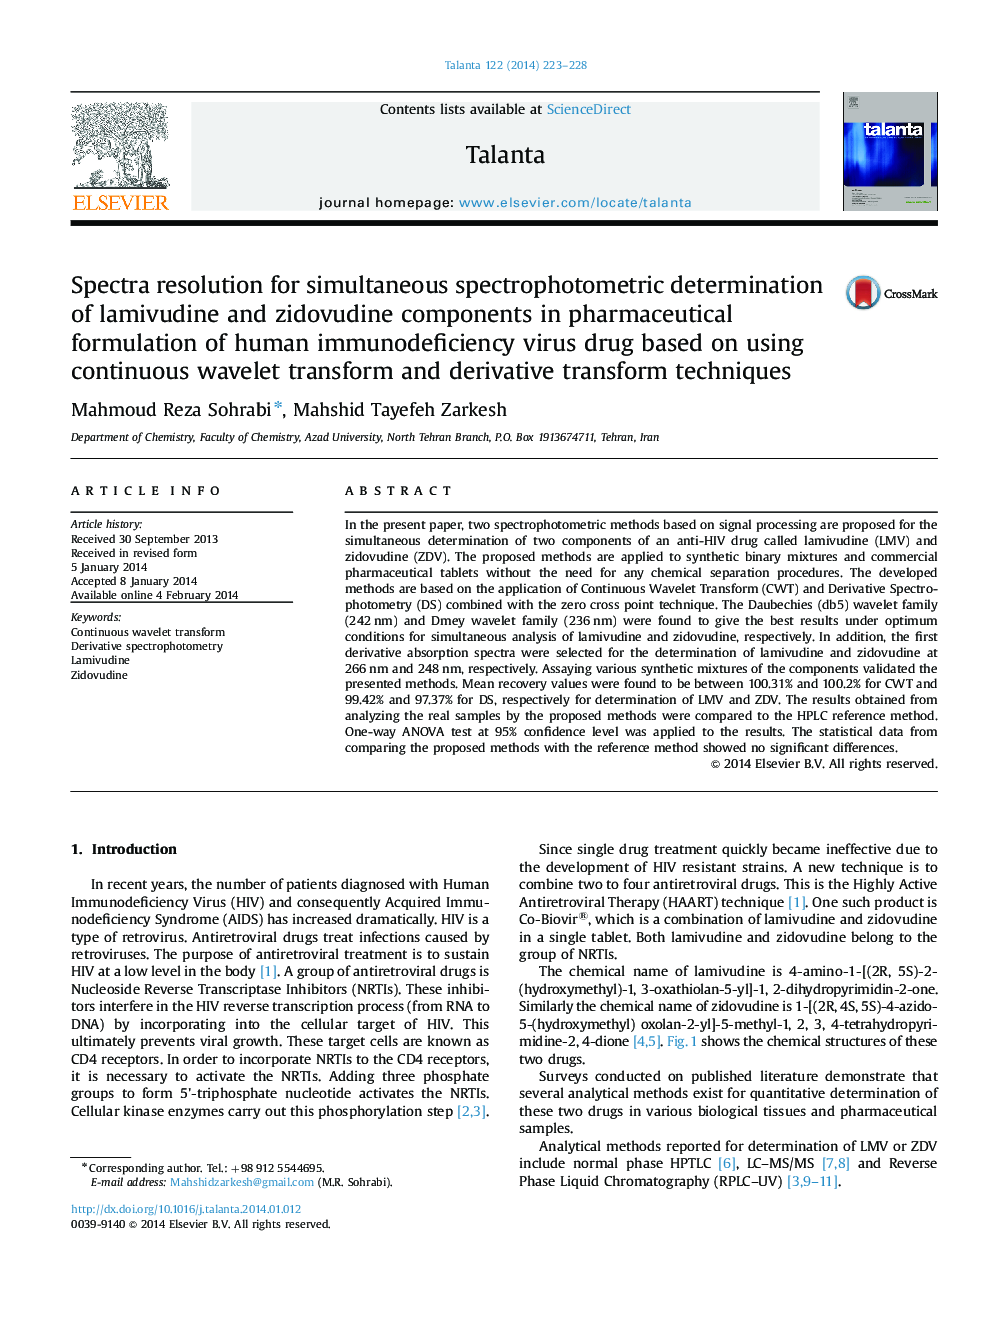 Spectra resolution for simultaneous spectrophotometric determination of lamivudine and zidovudine components in pharmaceutical formulation of human immunodeficiency virus drug based on using continuous wavelet transform and derivative transform techniques